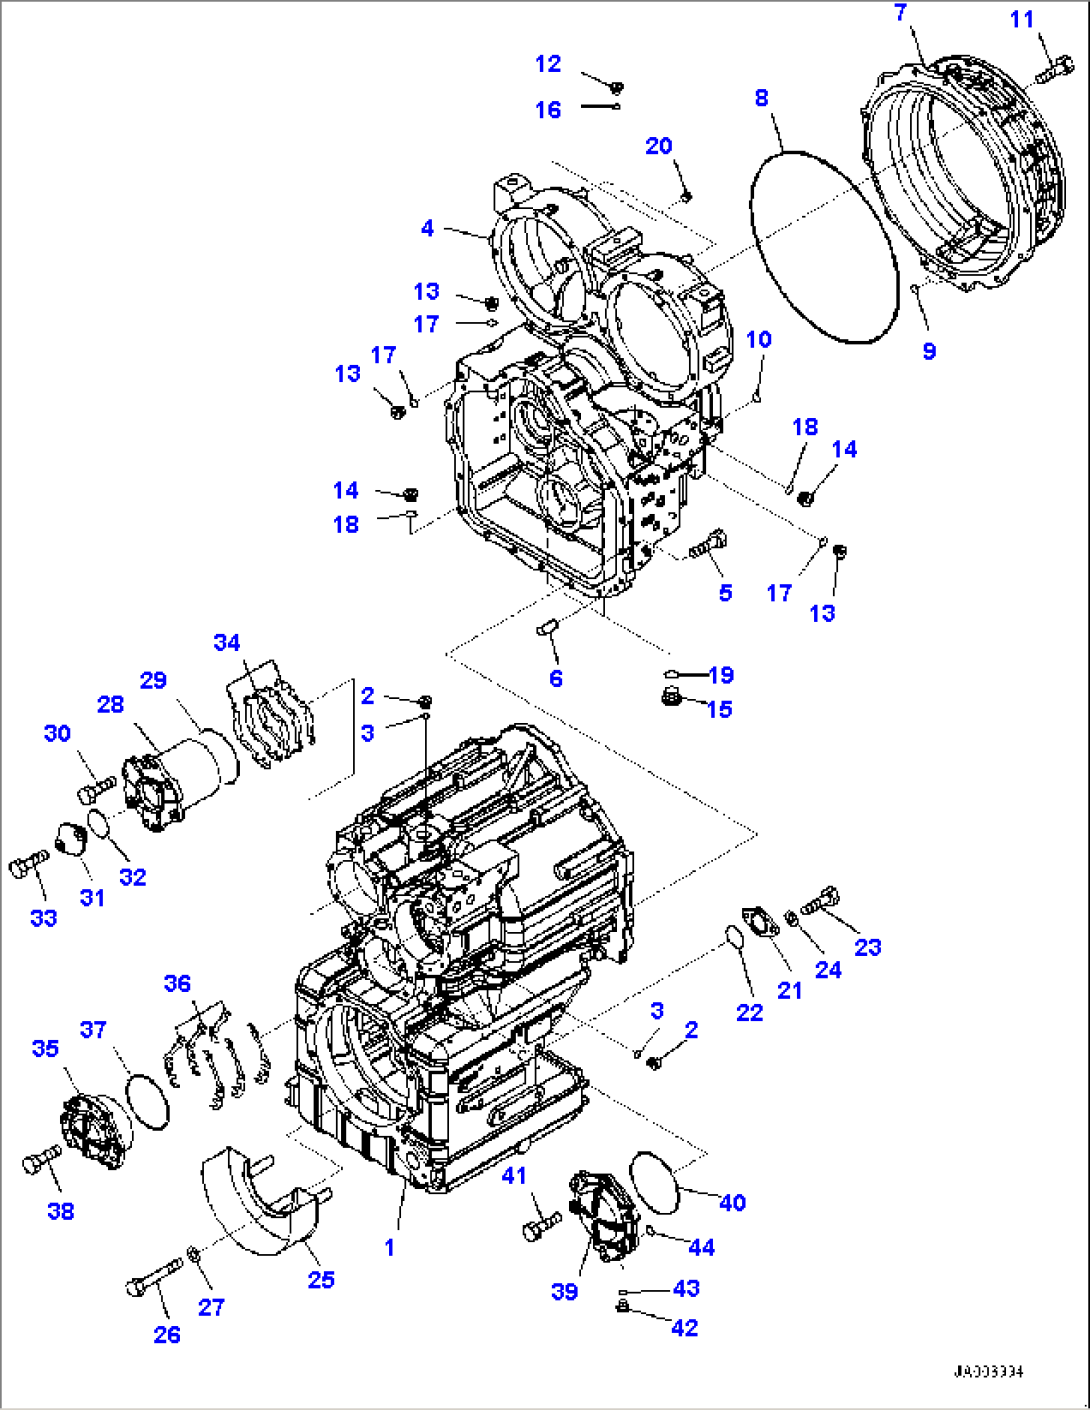 Torque Converter and Transmission, 3rd and 4th Housing (#90216-)